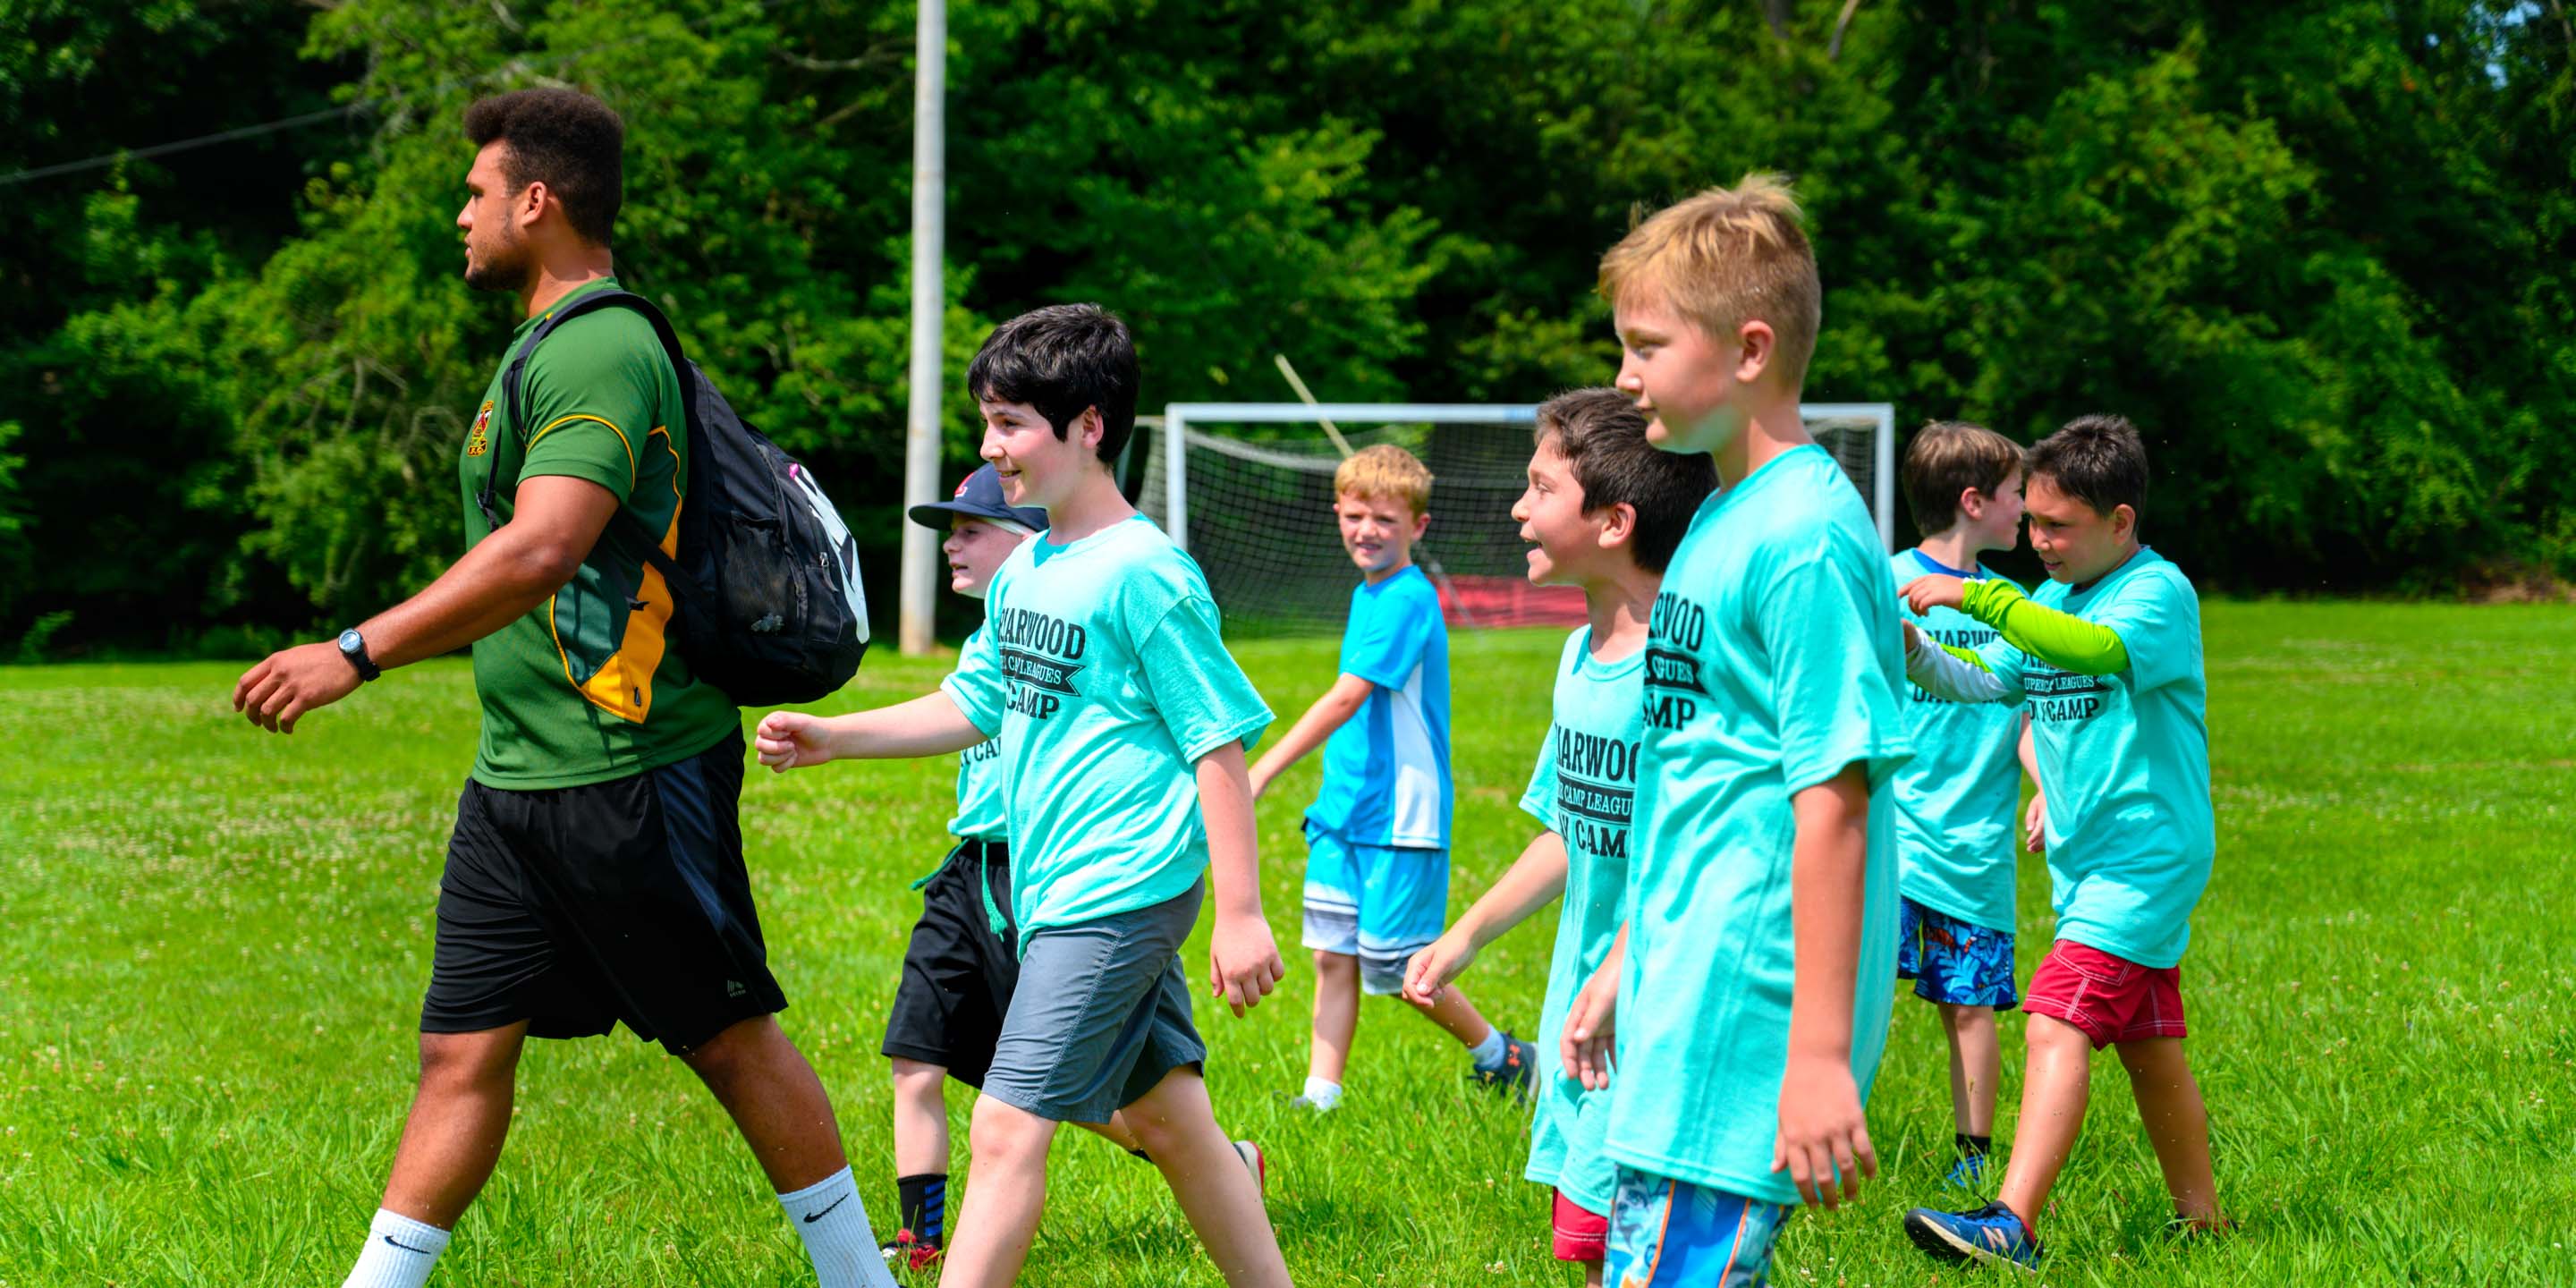 Campers walking to activity